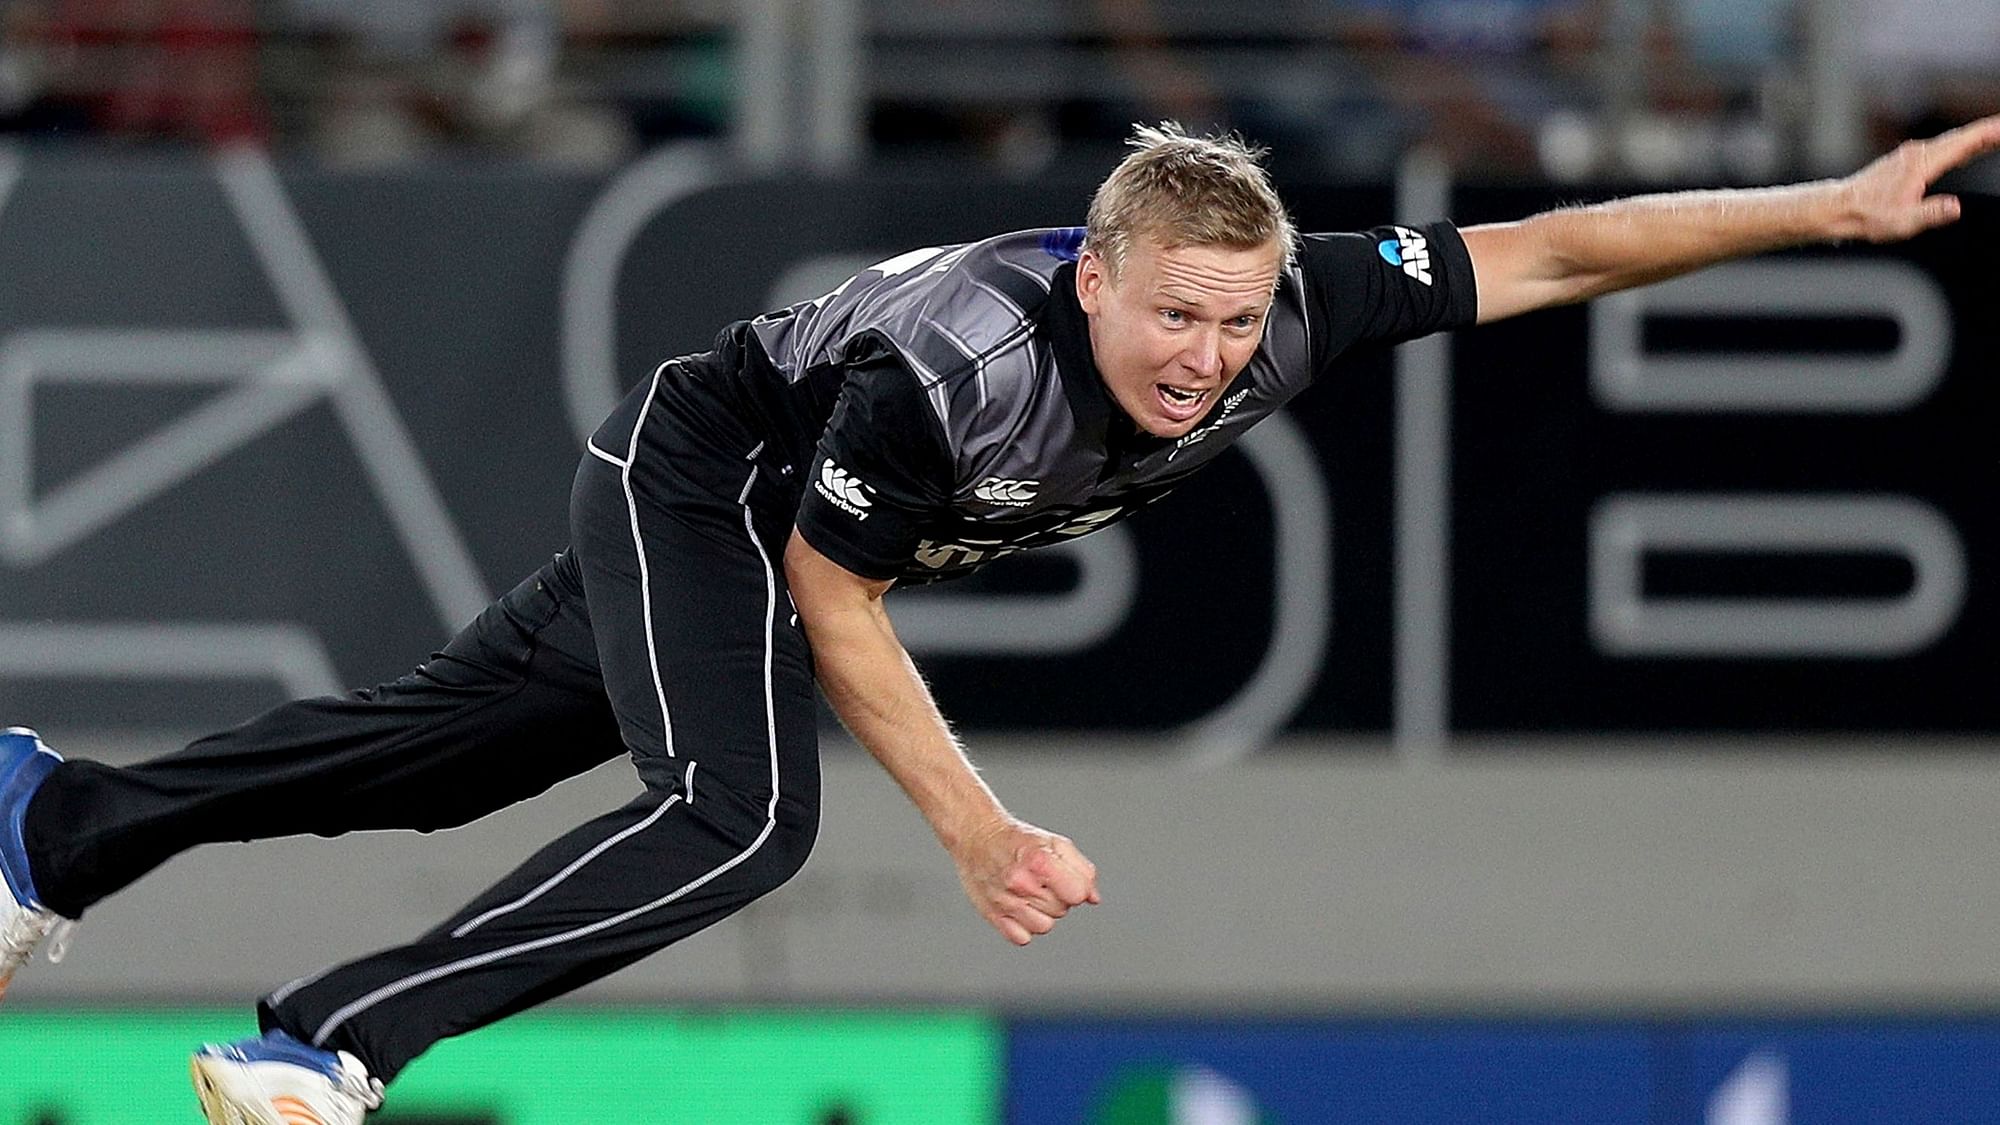 New Zealand cricketer Scott Kuggeleijn was accused of rape in 2015 but subsequently cleared of all charges.&nbsp;